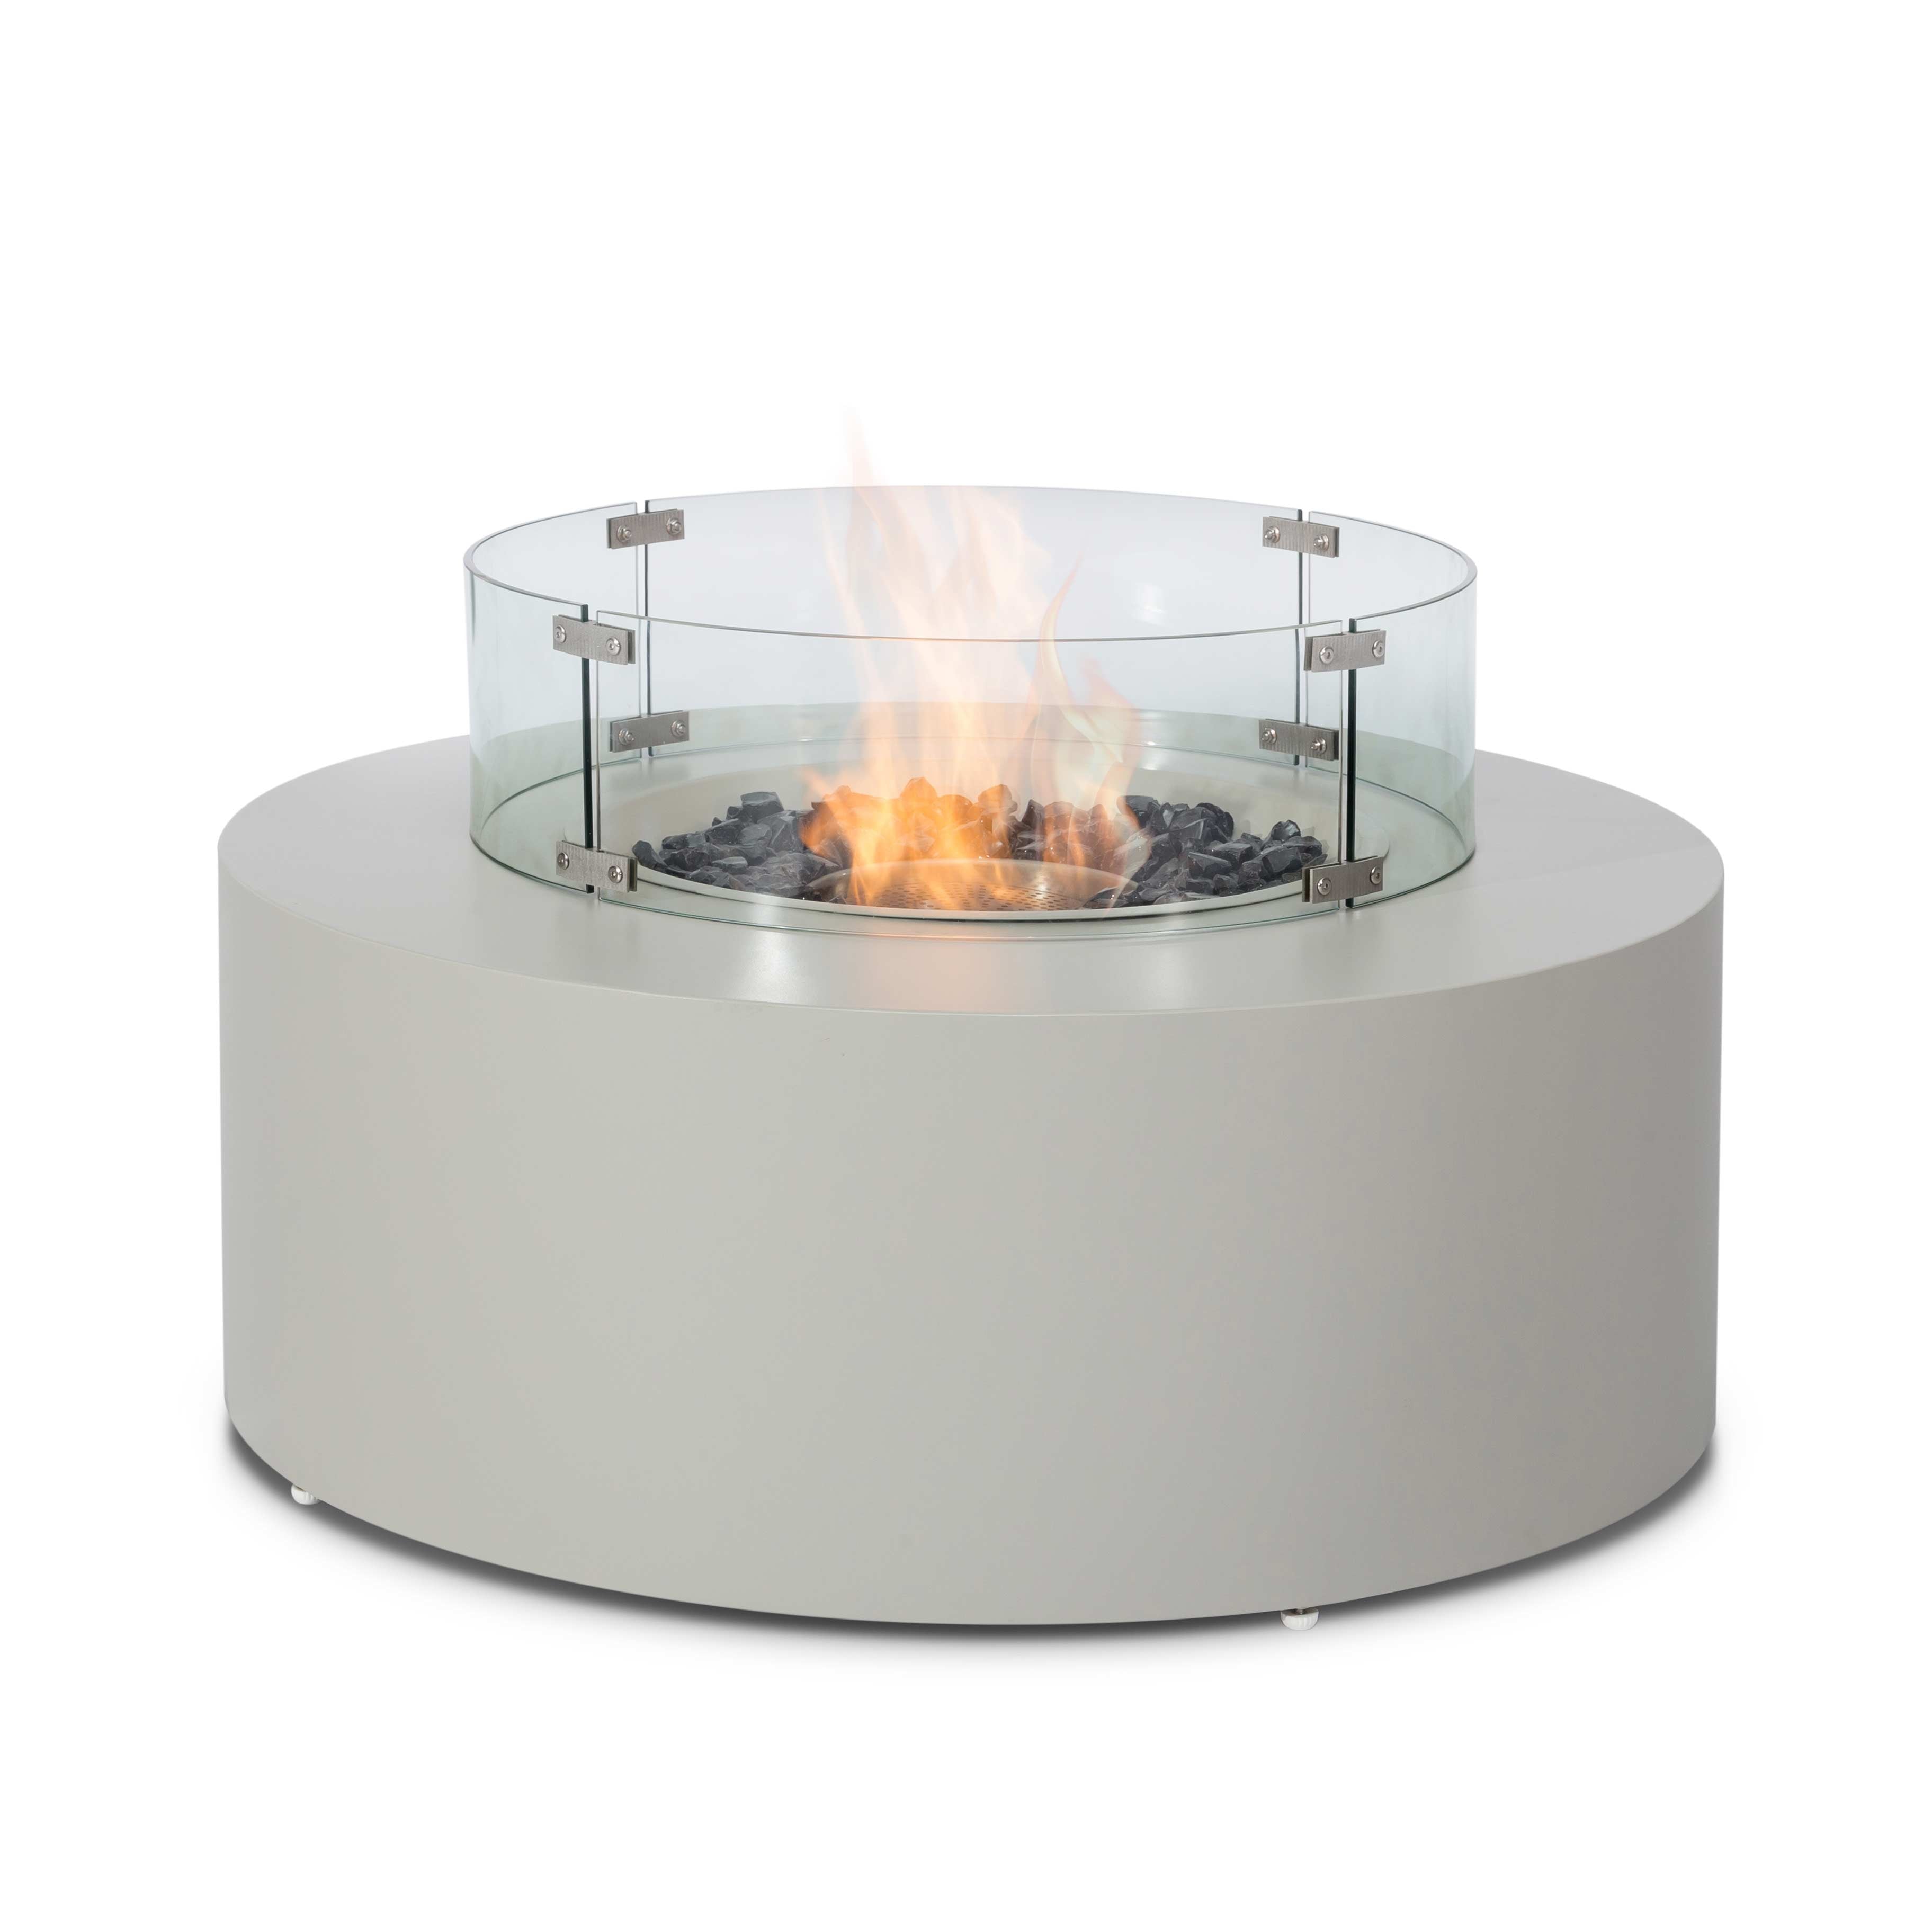 90ø Round Gas Fire Pit
(includes glass surround, and fire stones) | Pebble White